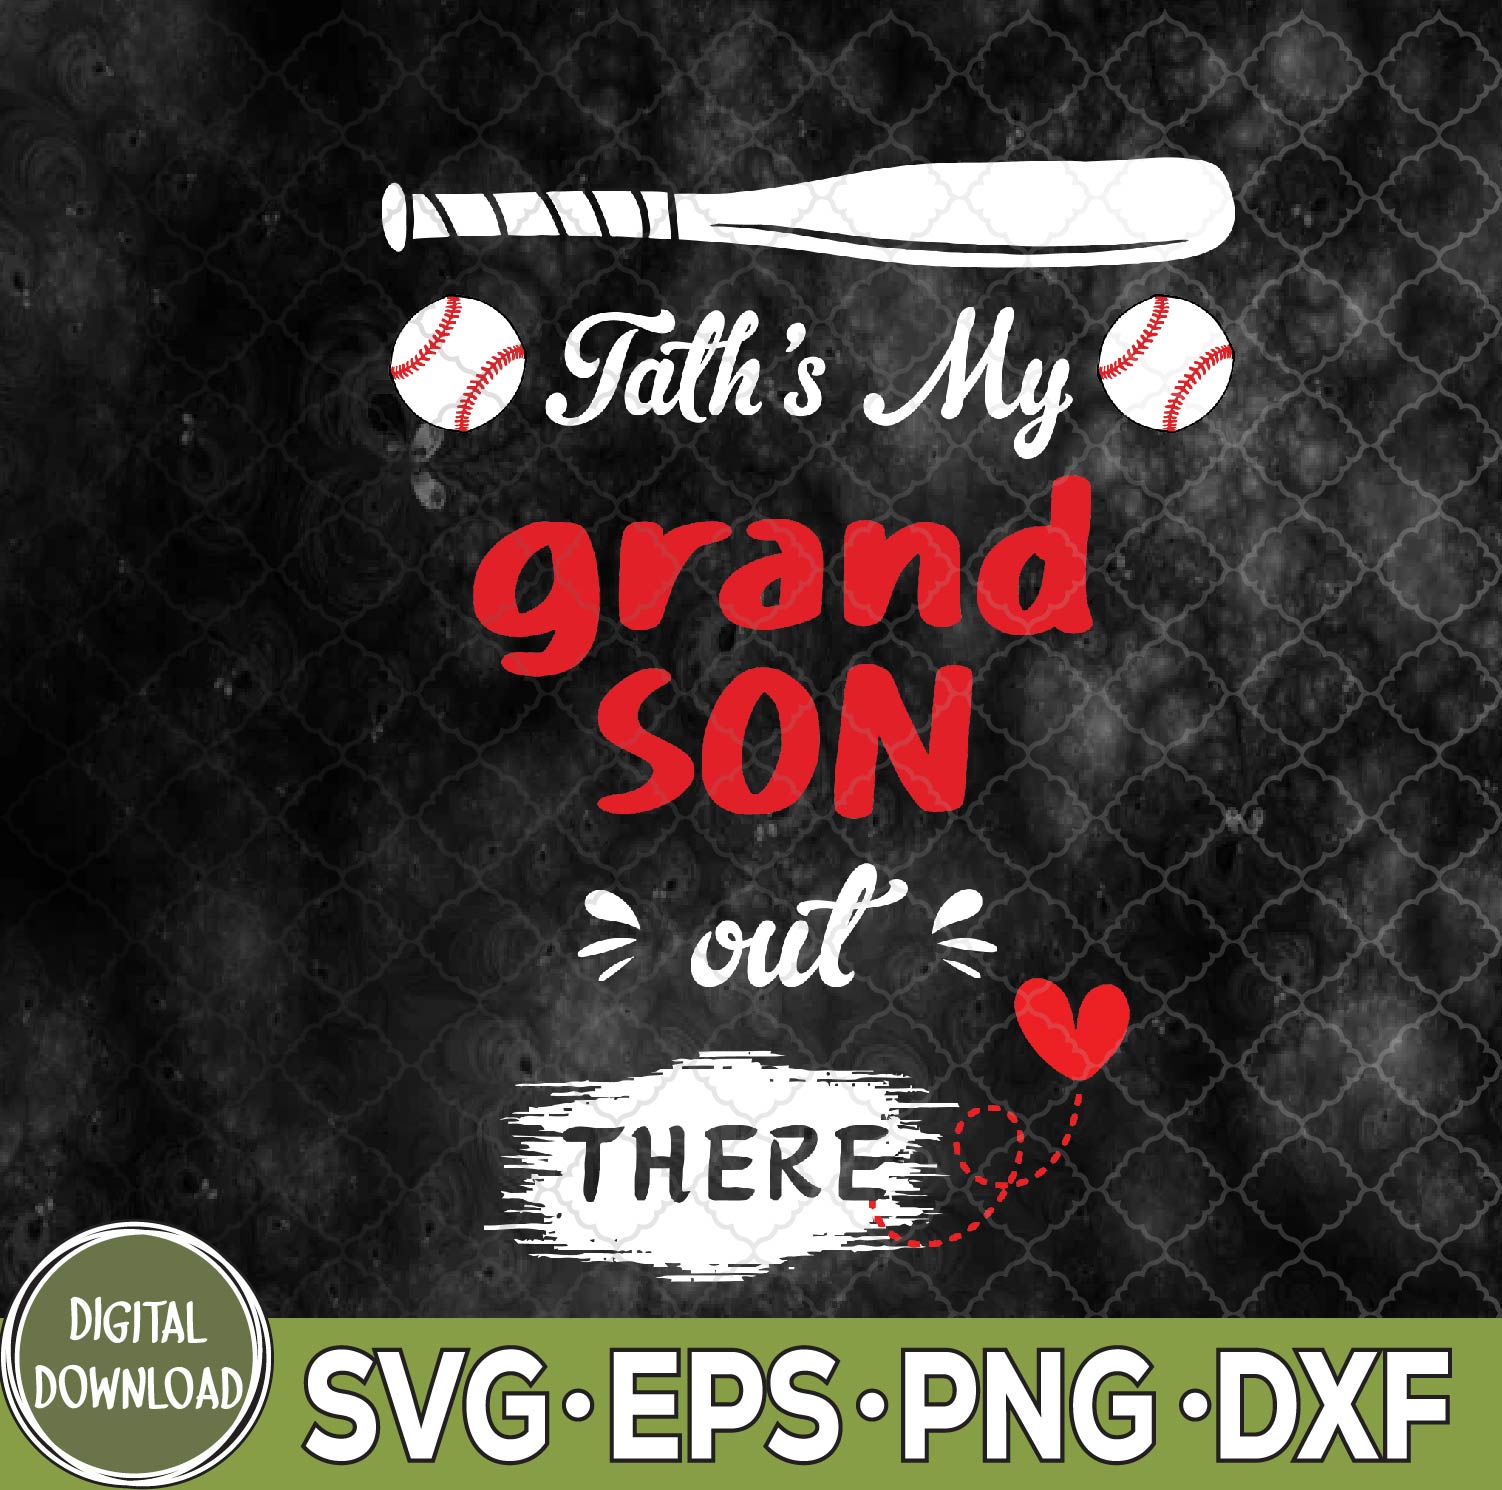 WTMNEW9file 09 173 That's My Grandson Out There, Retro Playing Baseball Grandma Svg, Png, Digital Download